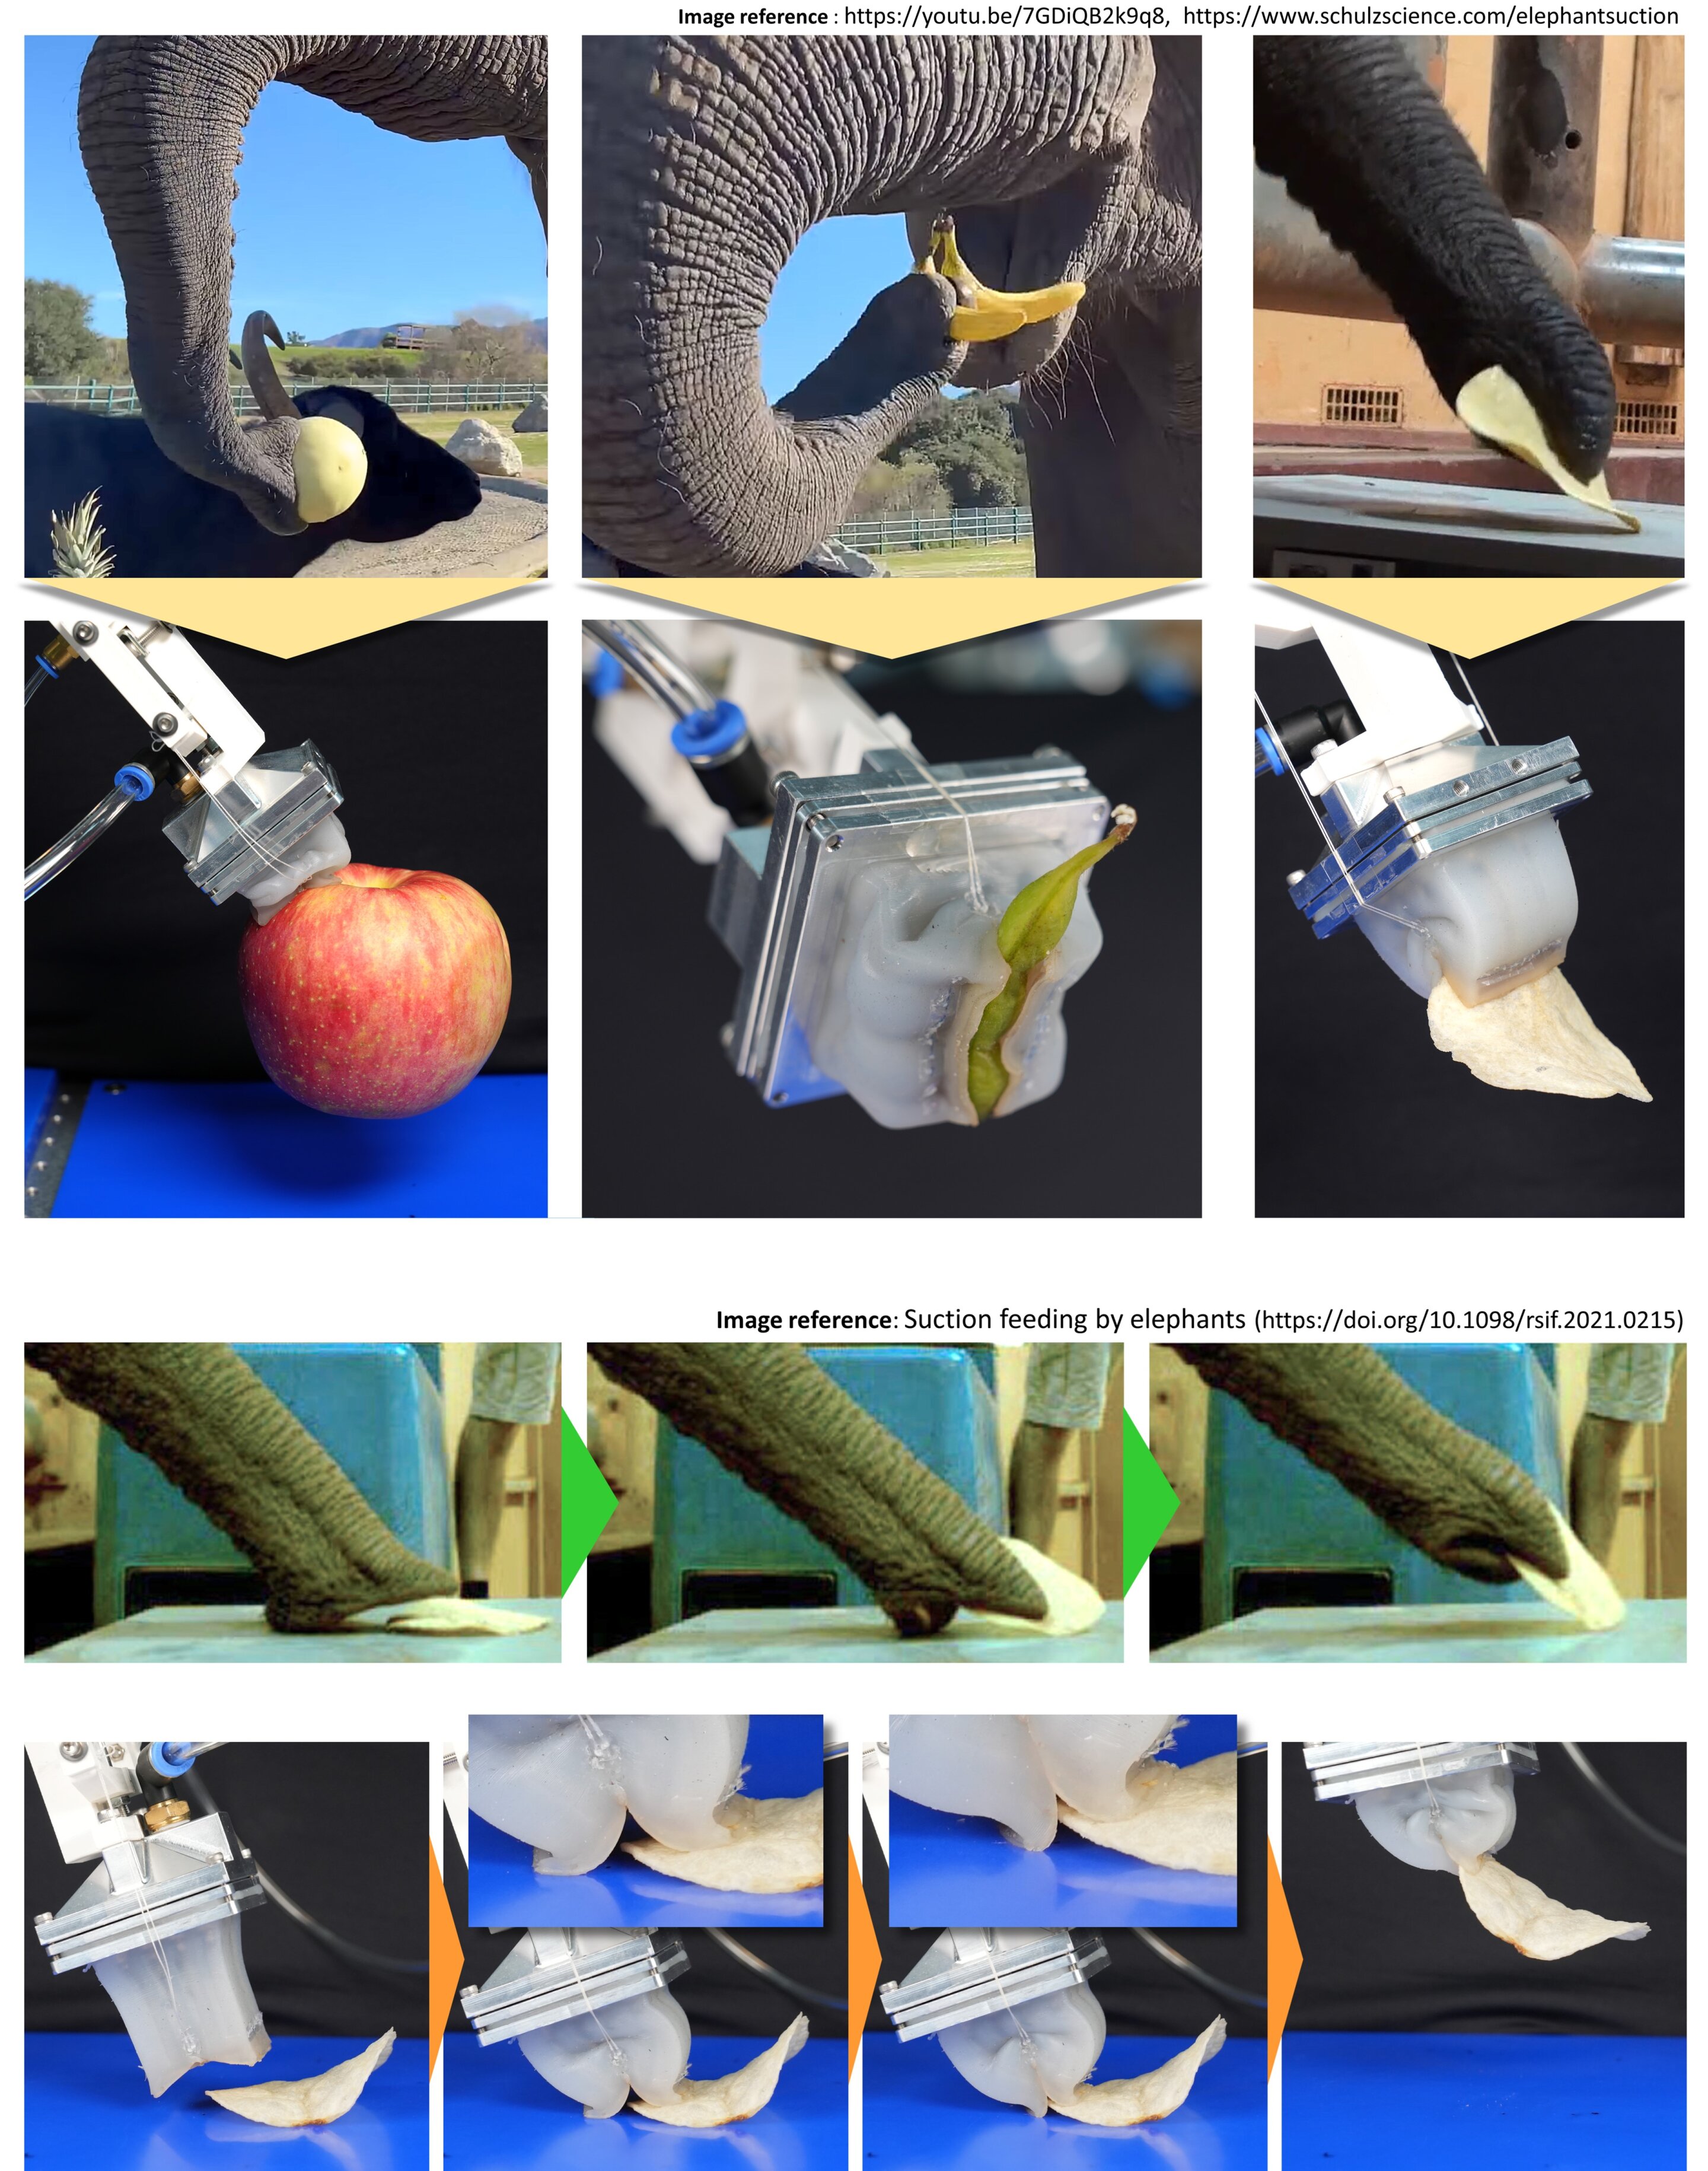 Developing the world’s first elephant trunk-mimetic robot hand, capable of gripping even fine needles